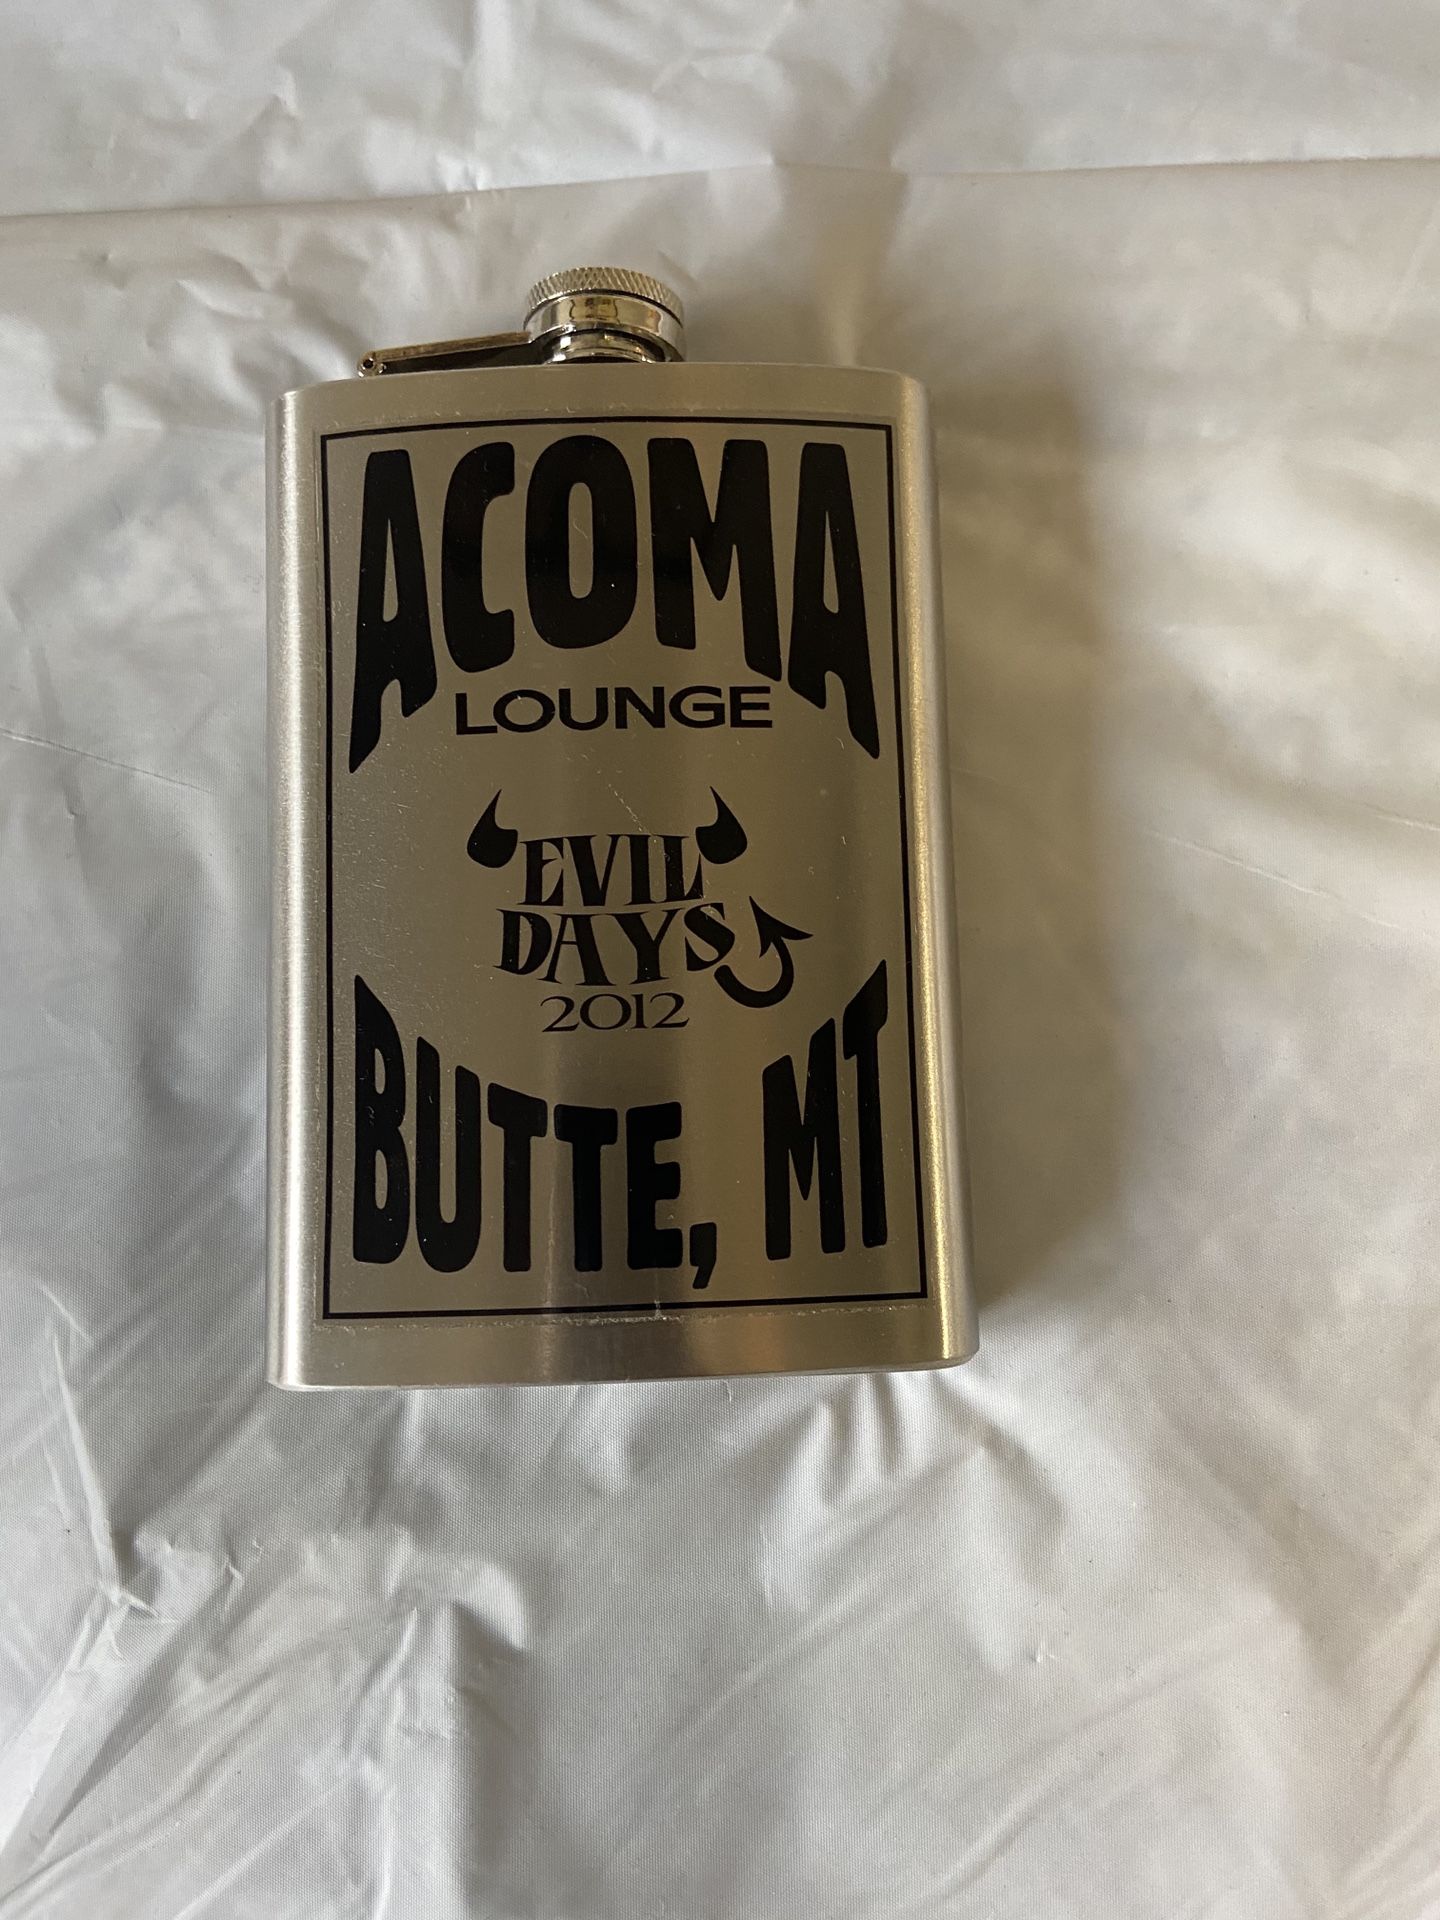 Flask. Acoma lounge, Butte MT. Evil Kneivel Days 2012